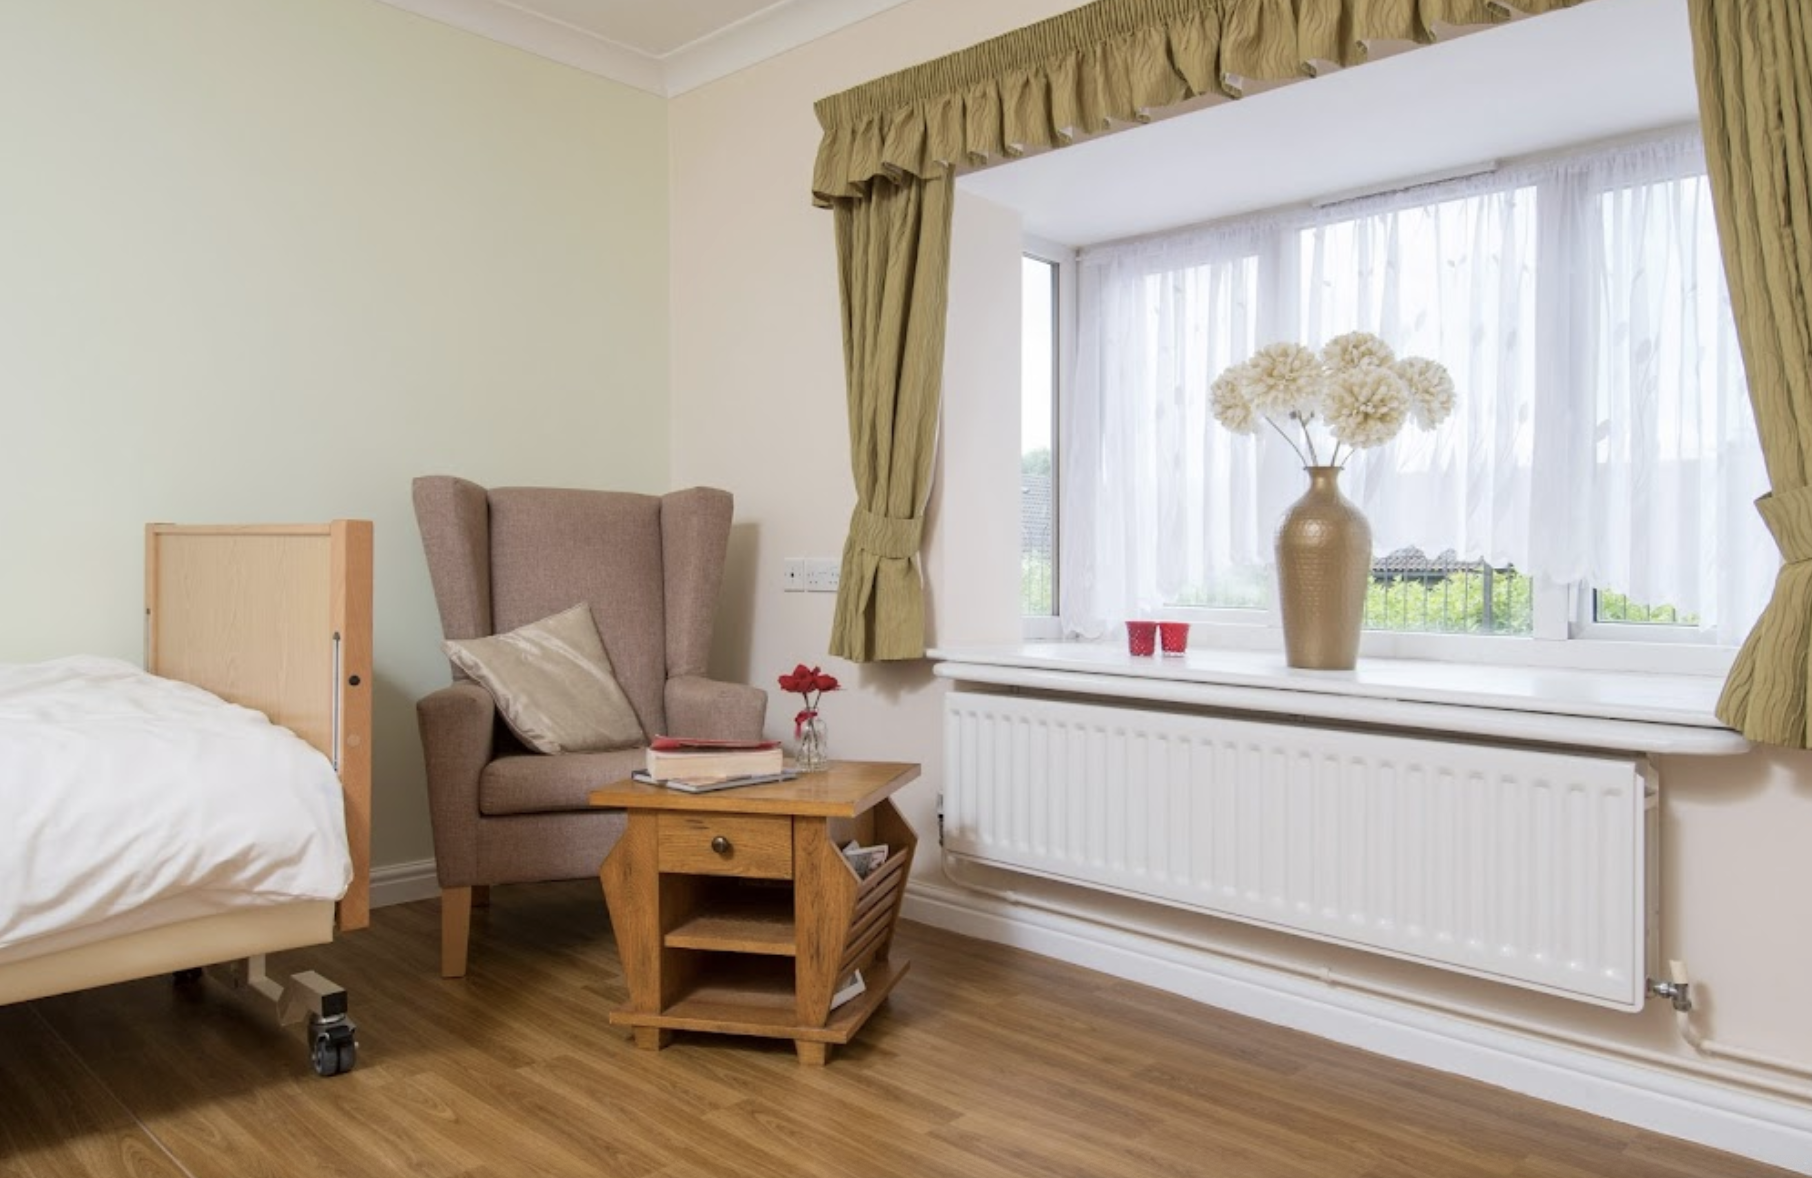 Bedroom of Colonia Court care home in Colchester, Essex